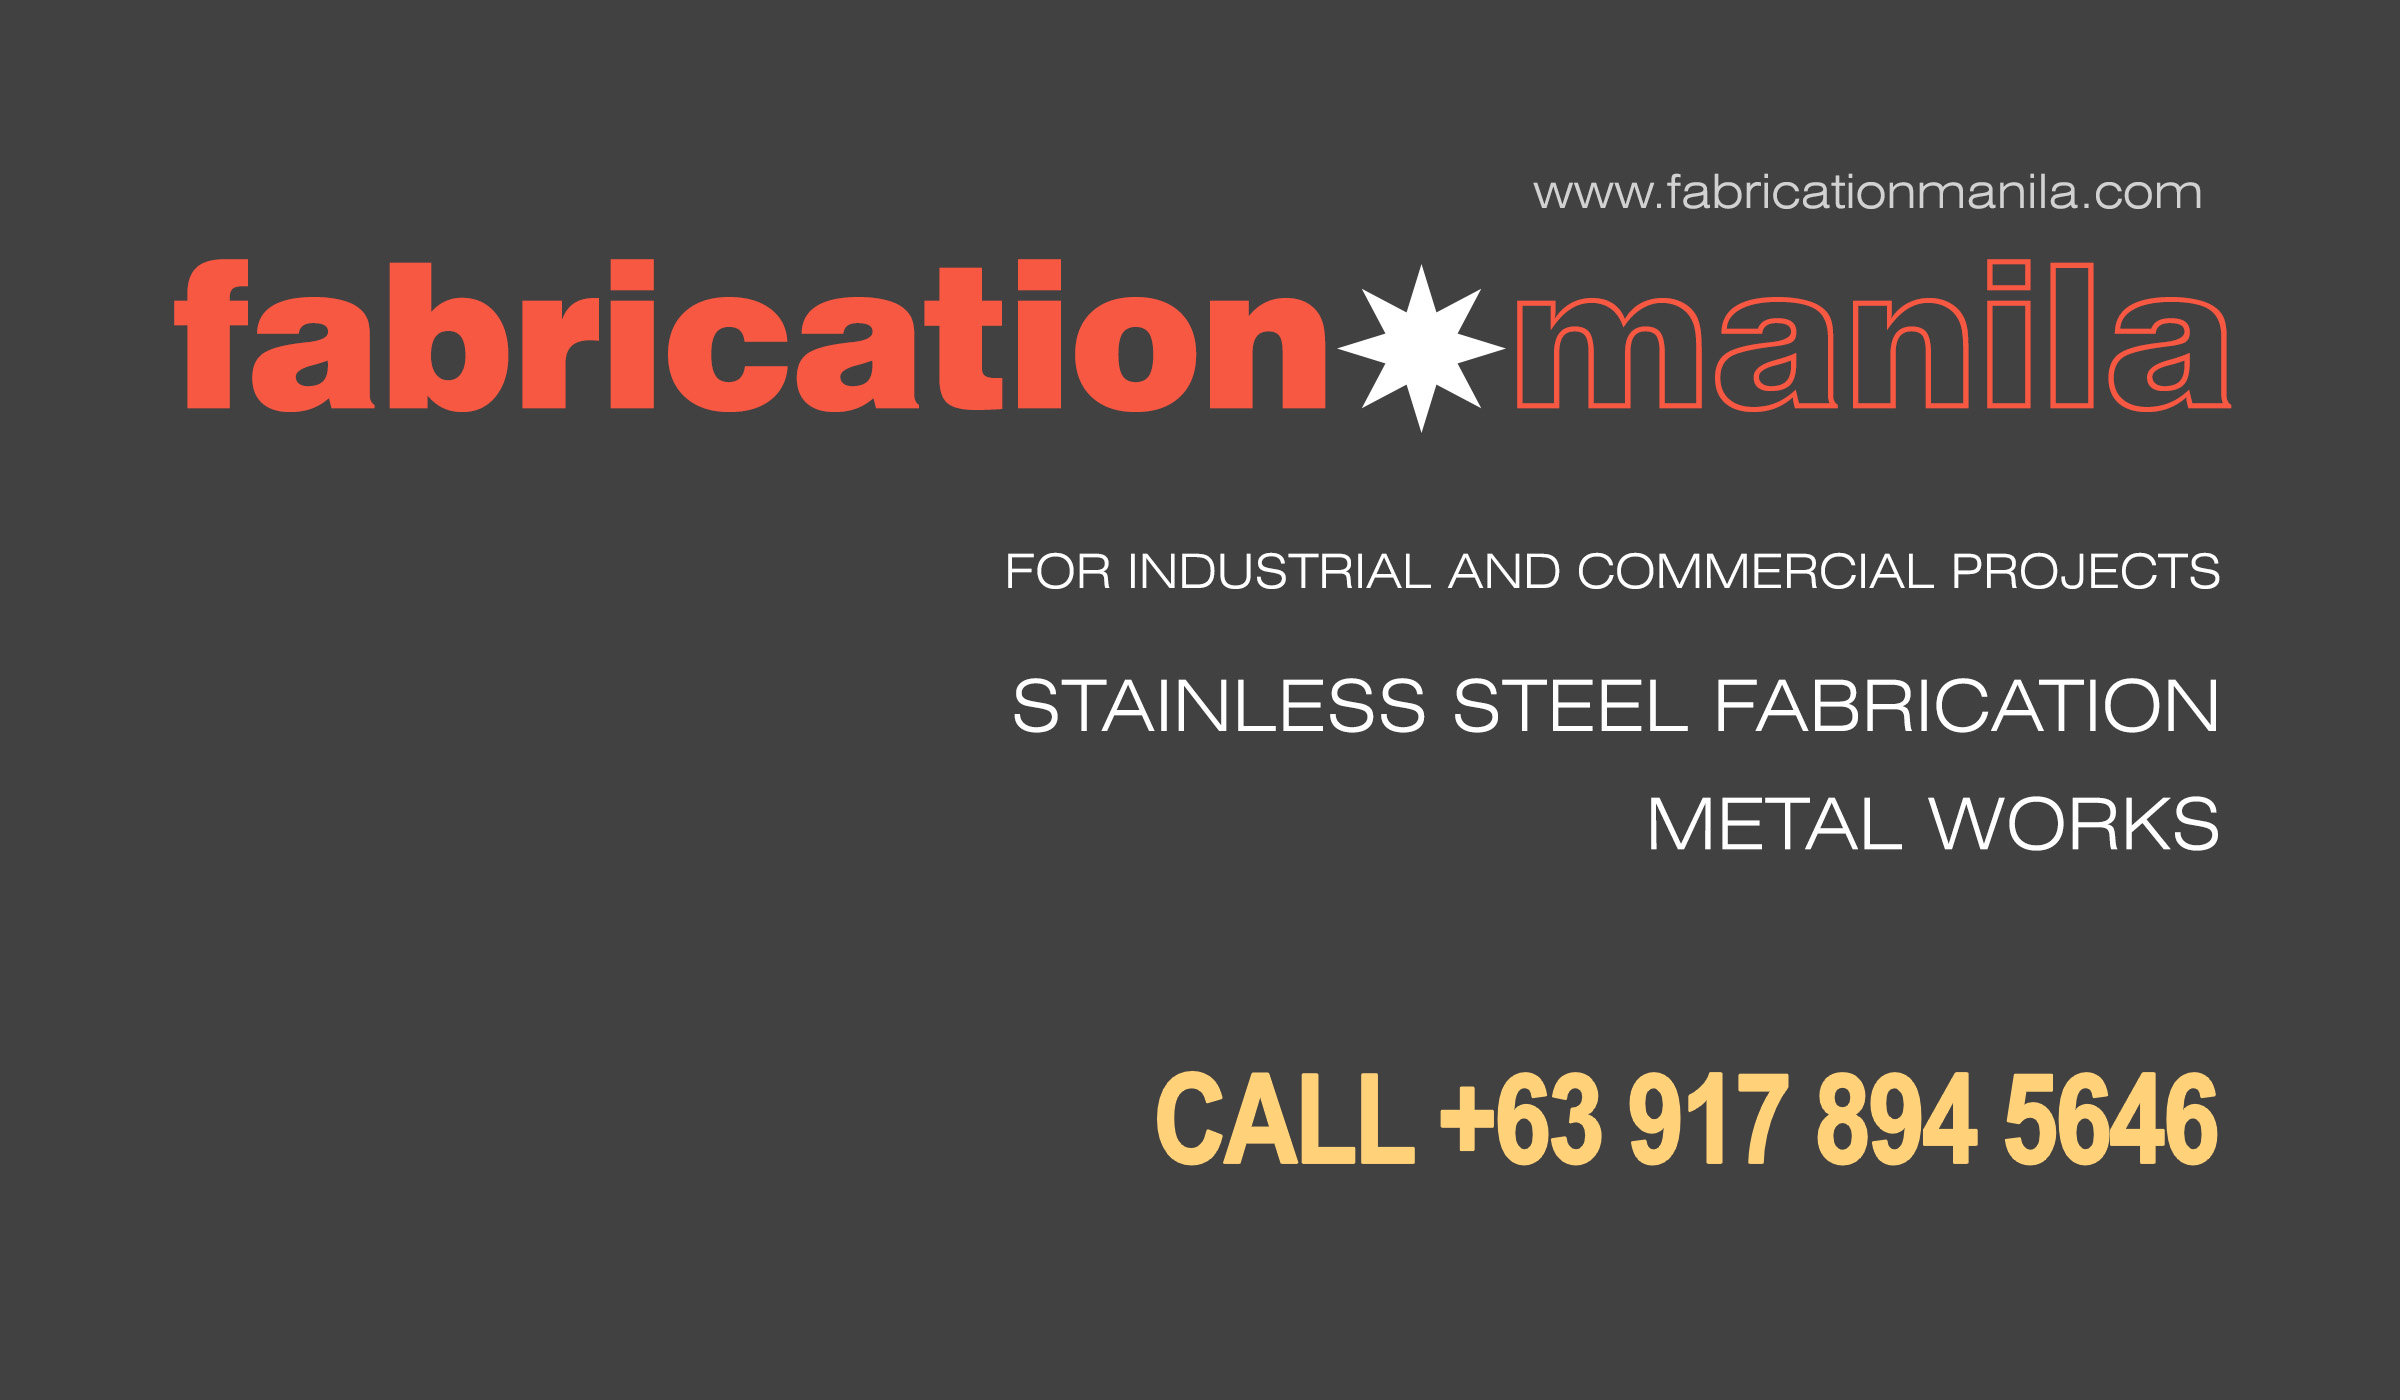 Fabrication Manila Stainless Steel Fabrication and Metal Works Philippines